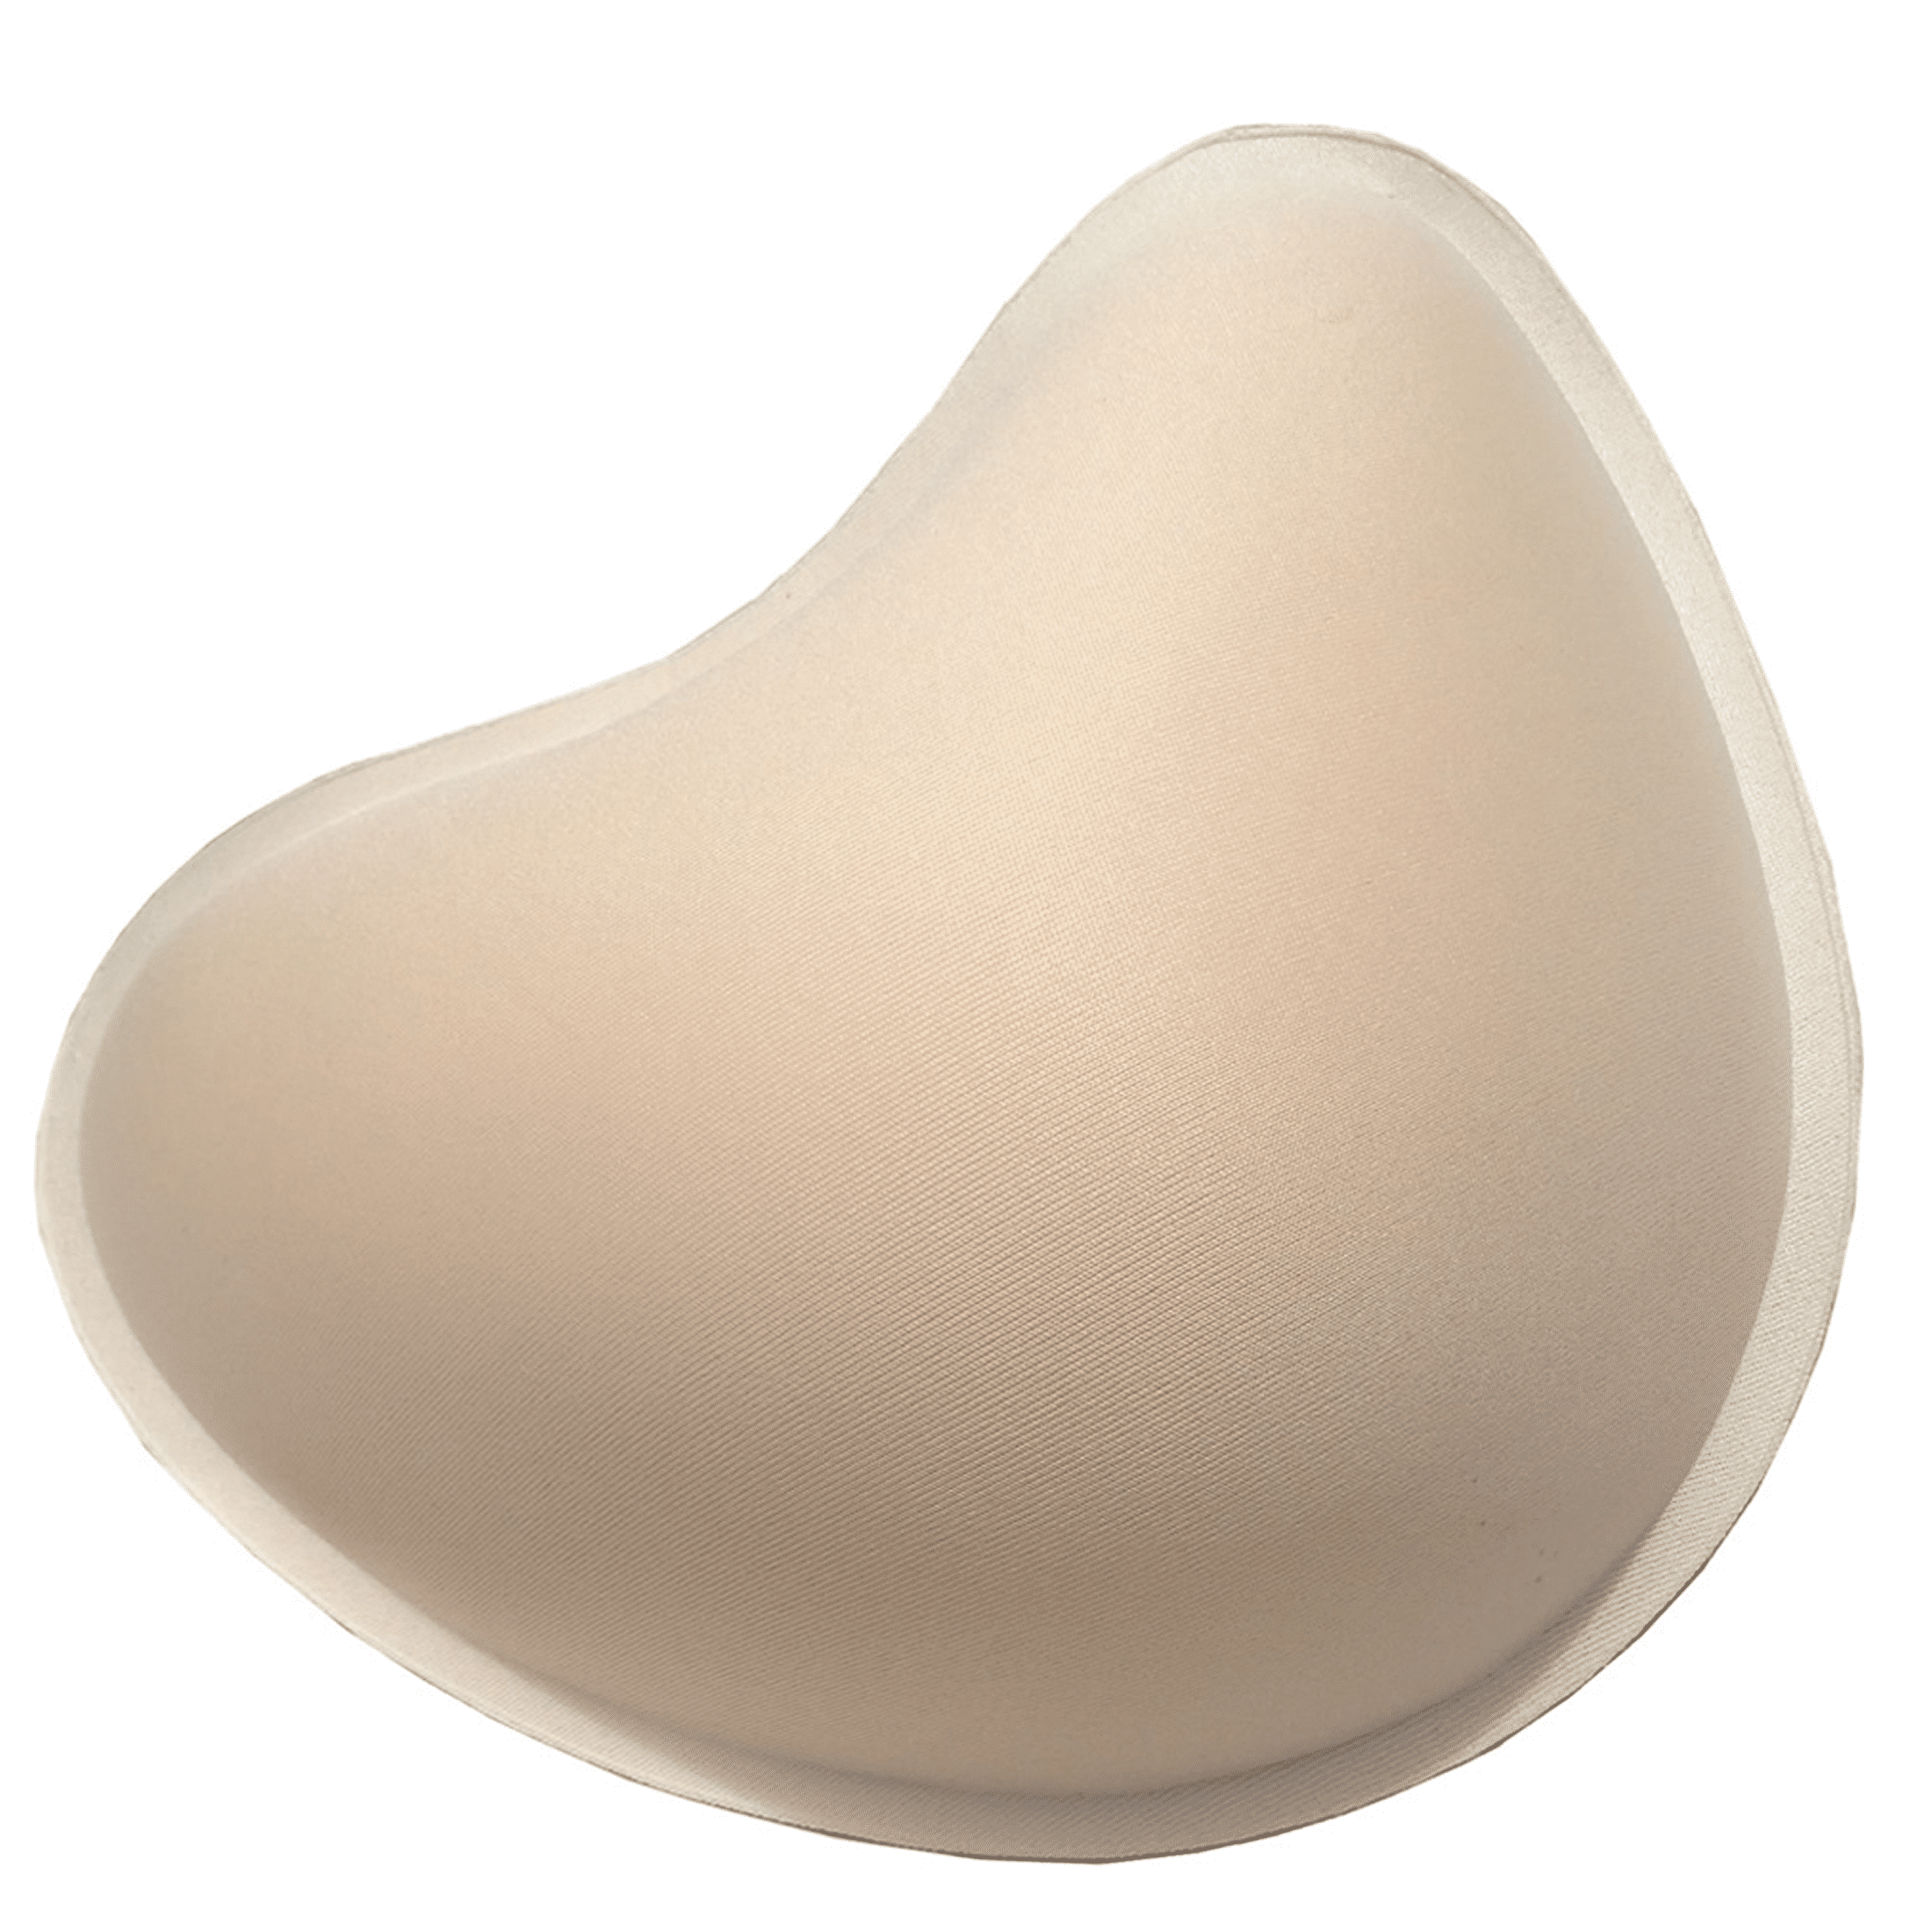 Trplayer Cotton Mastectomy Breast Prosthesis Forms Spiral Shape